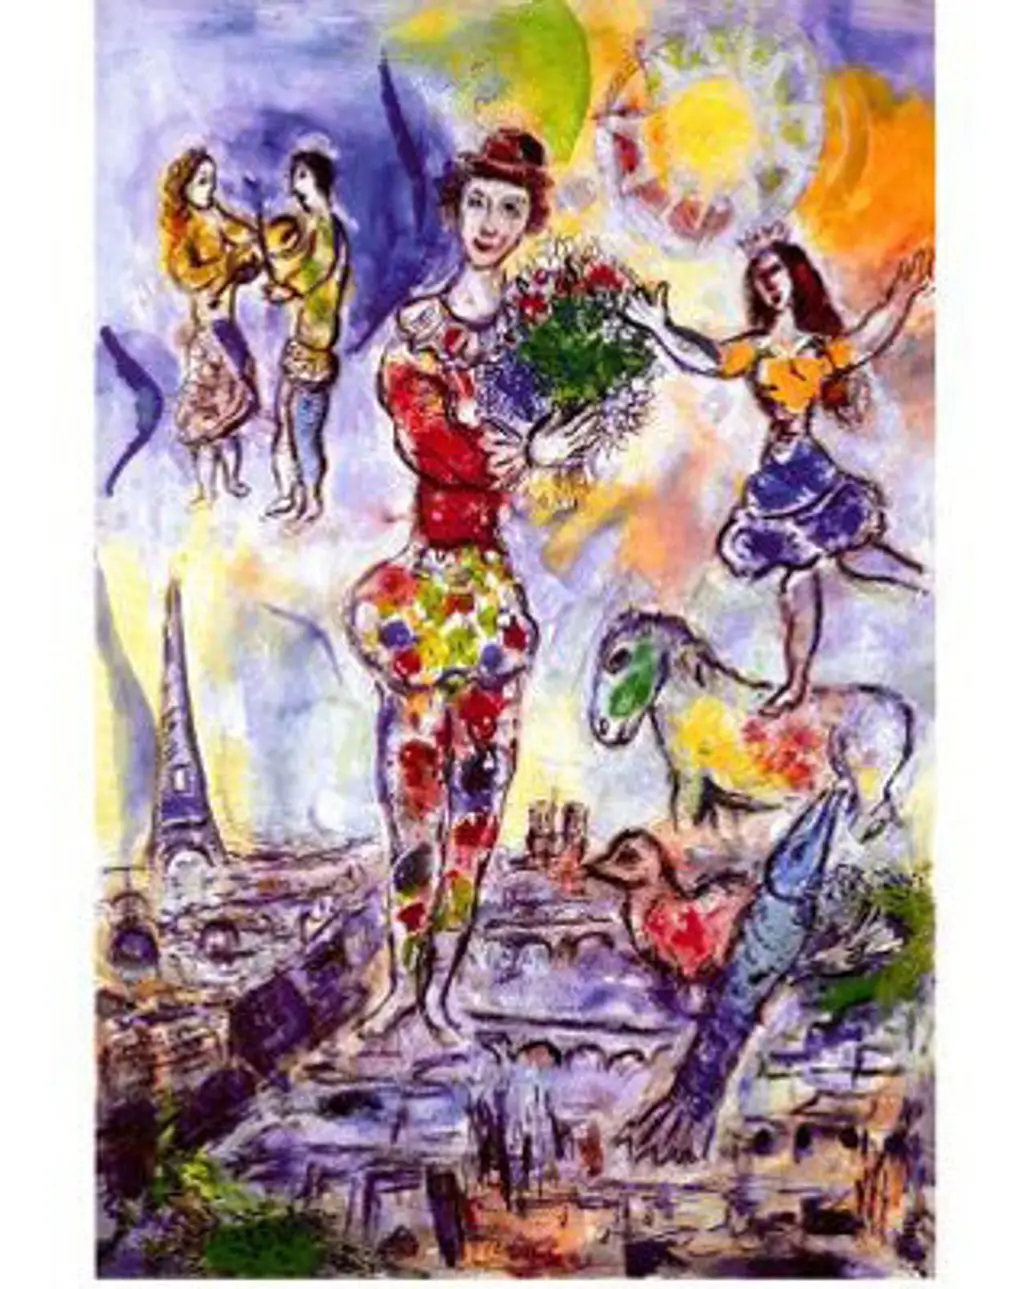 On the Roof of Paris Art Poster Print by Marc Chagall